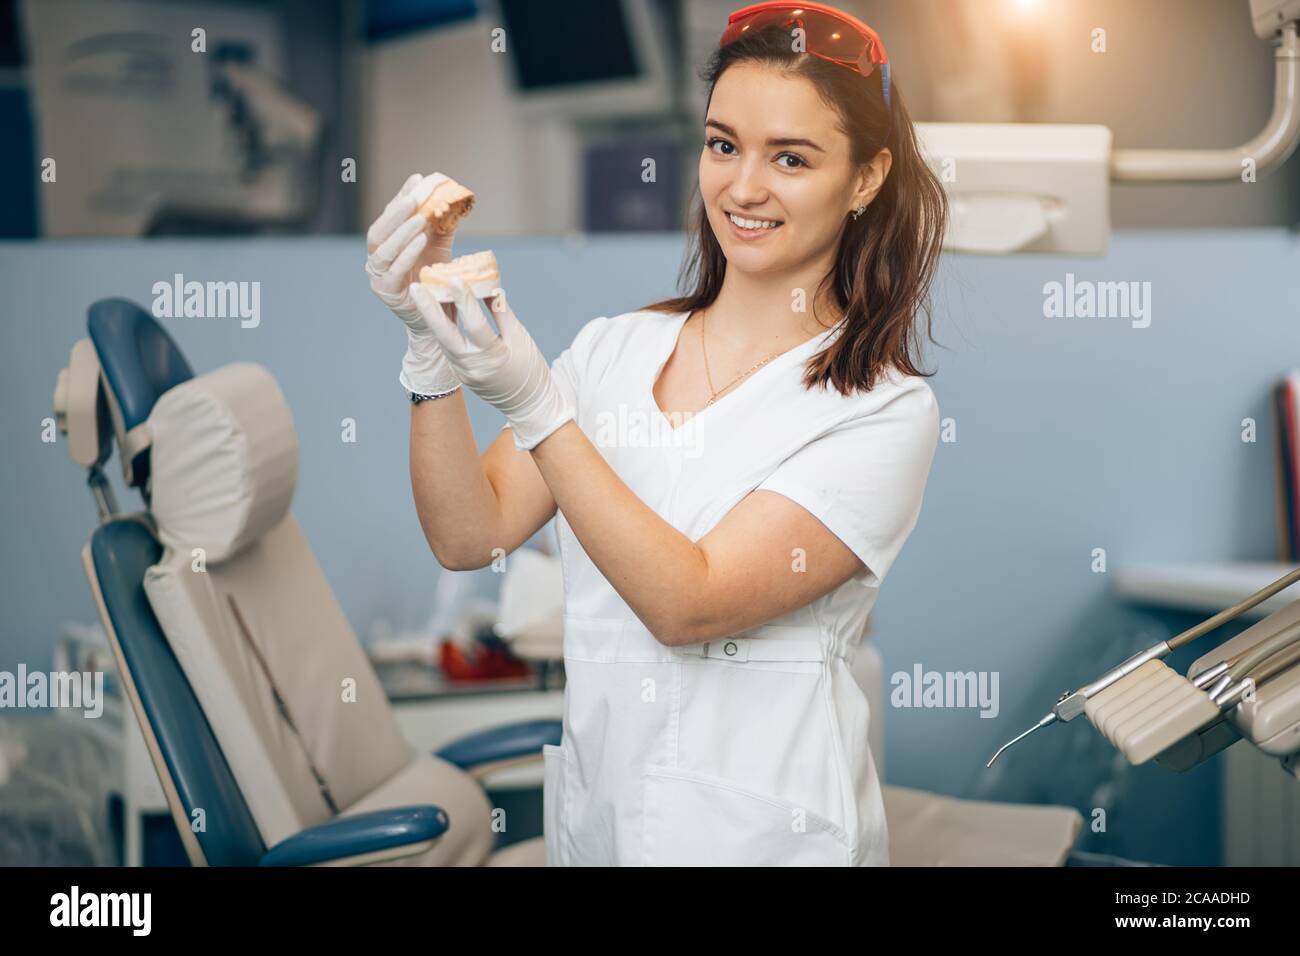 portrait of dental specialist at work, wearing white doctor's uniform, using medical instruments and equipment. Healthcare concept Stock Photo